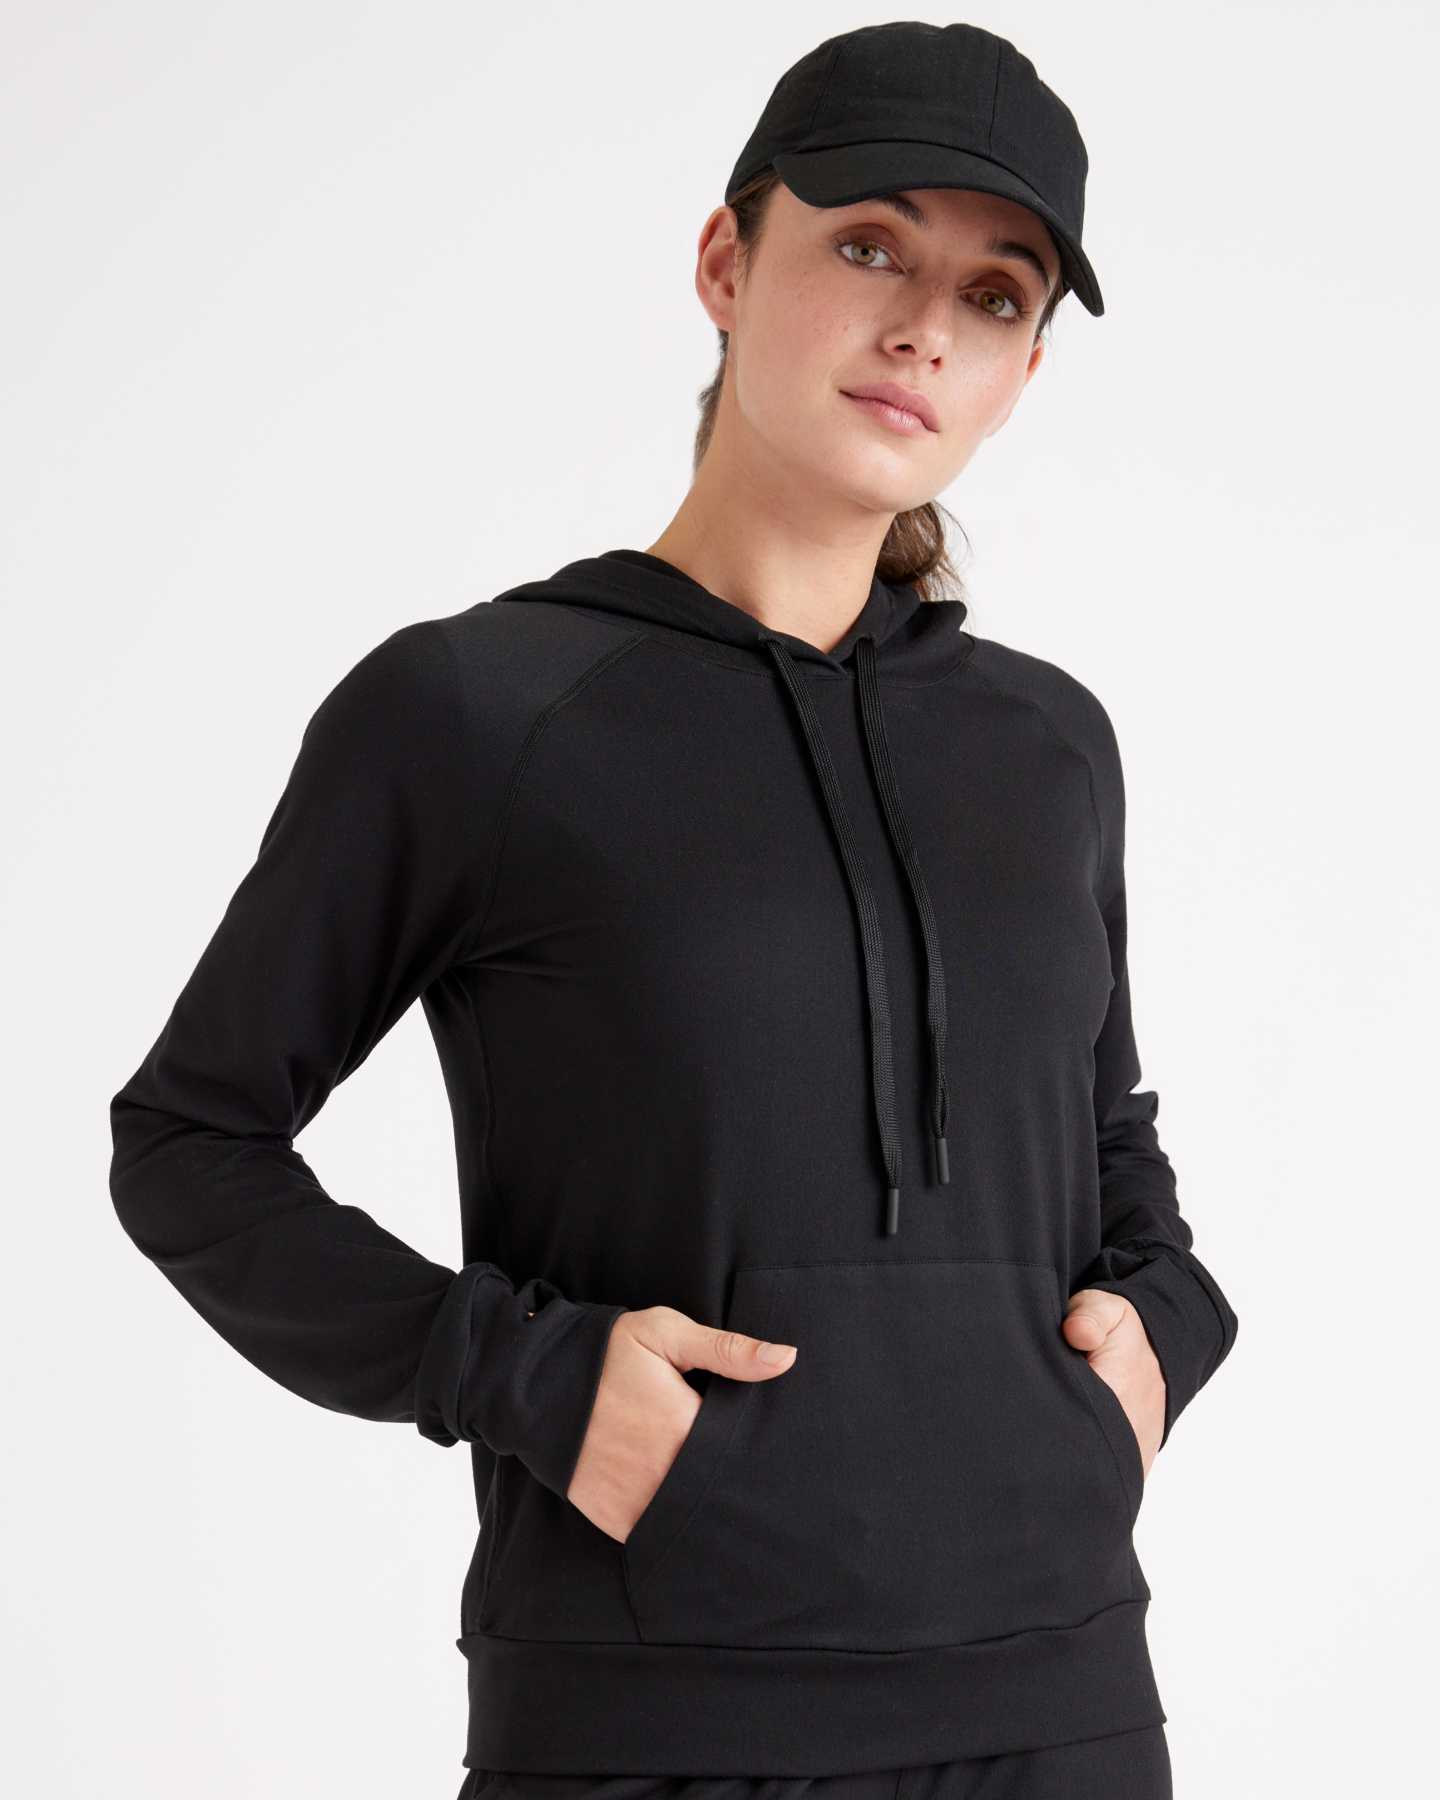 Flowknit Ultra-Soft Performance Pullover Hoodie - Black